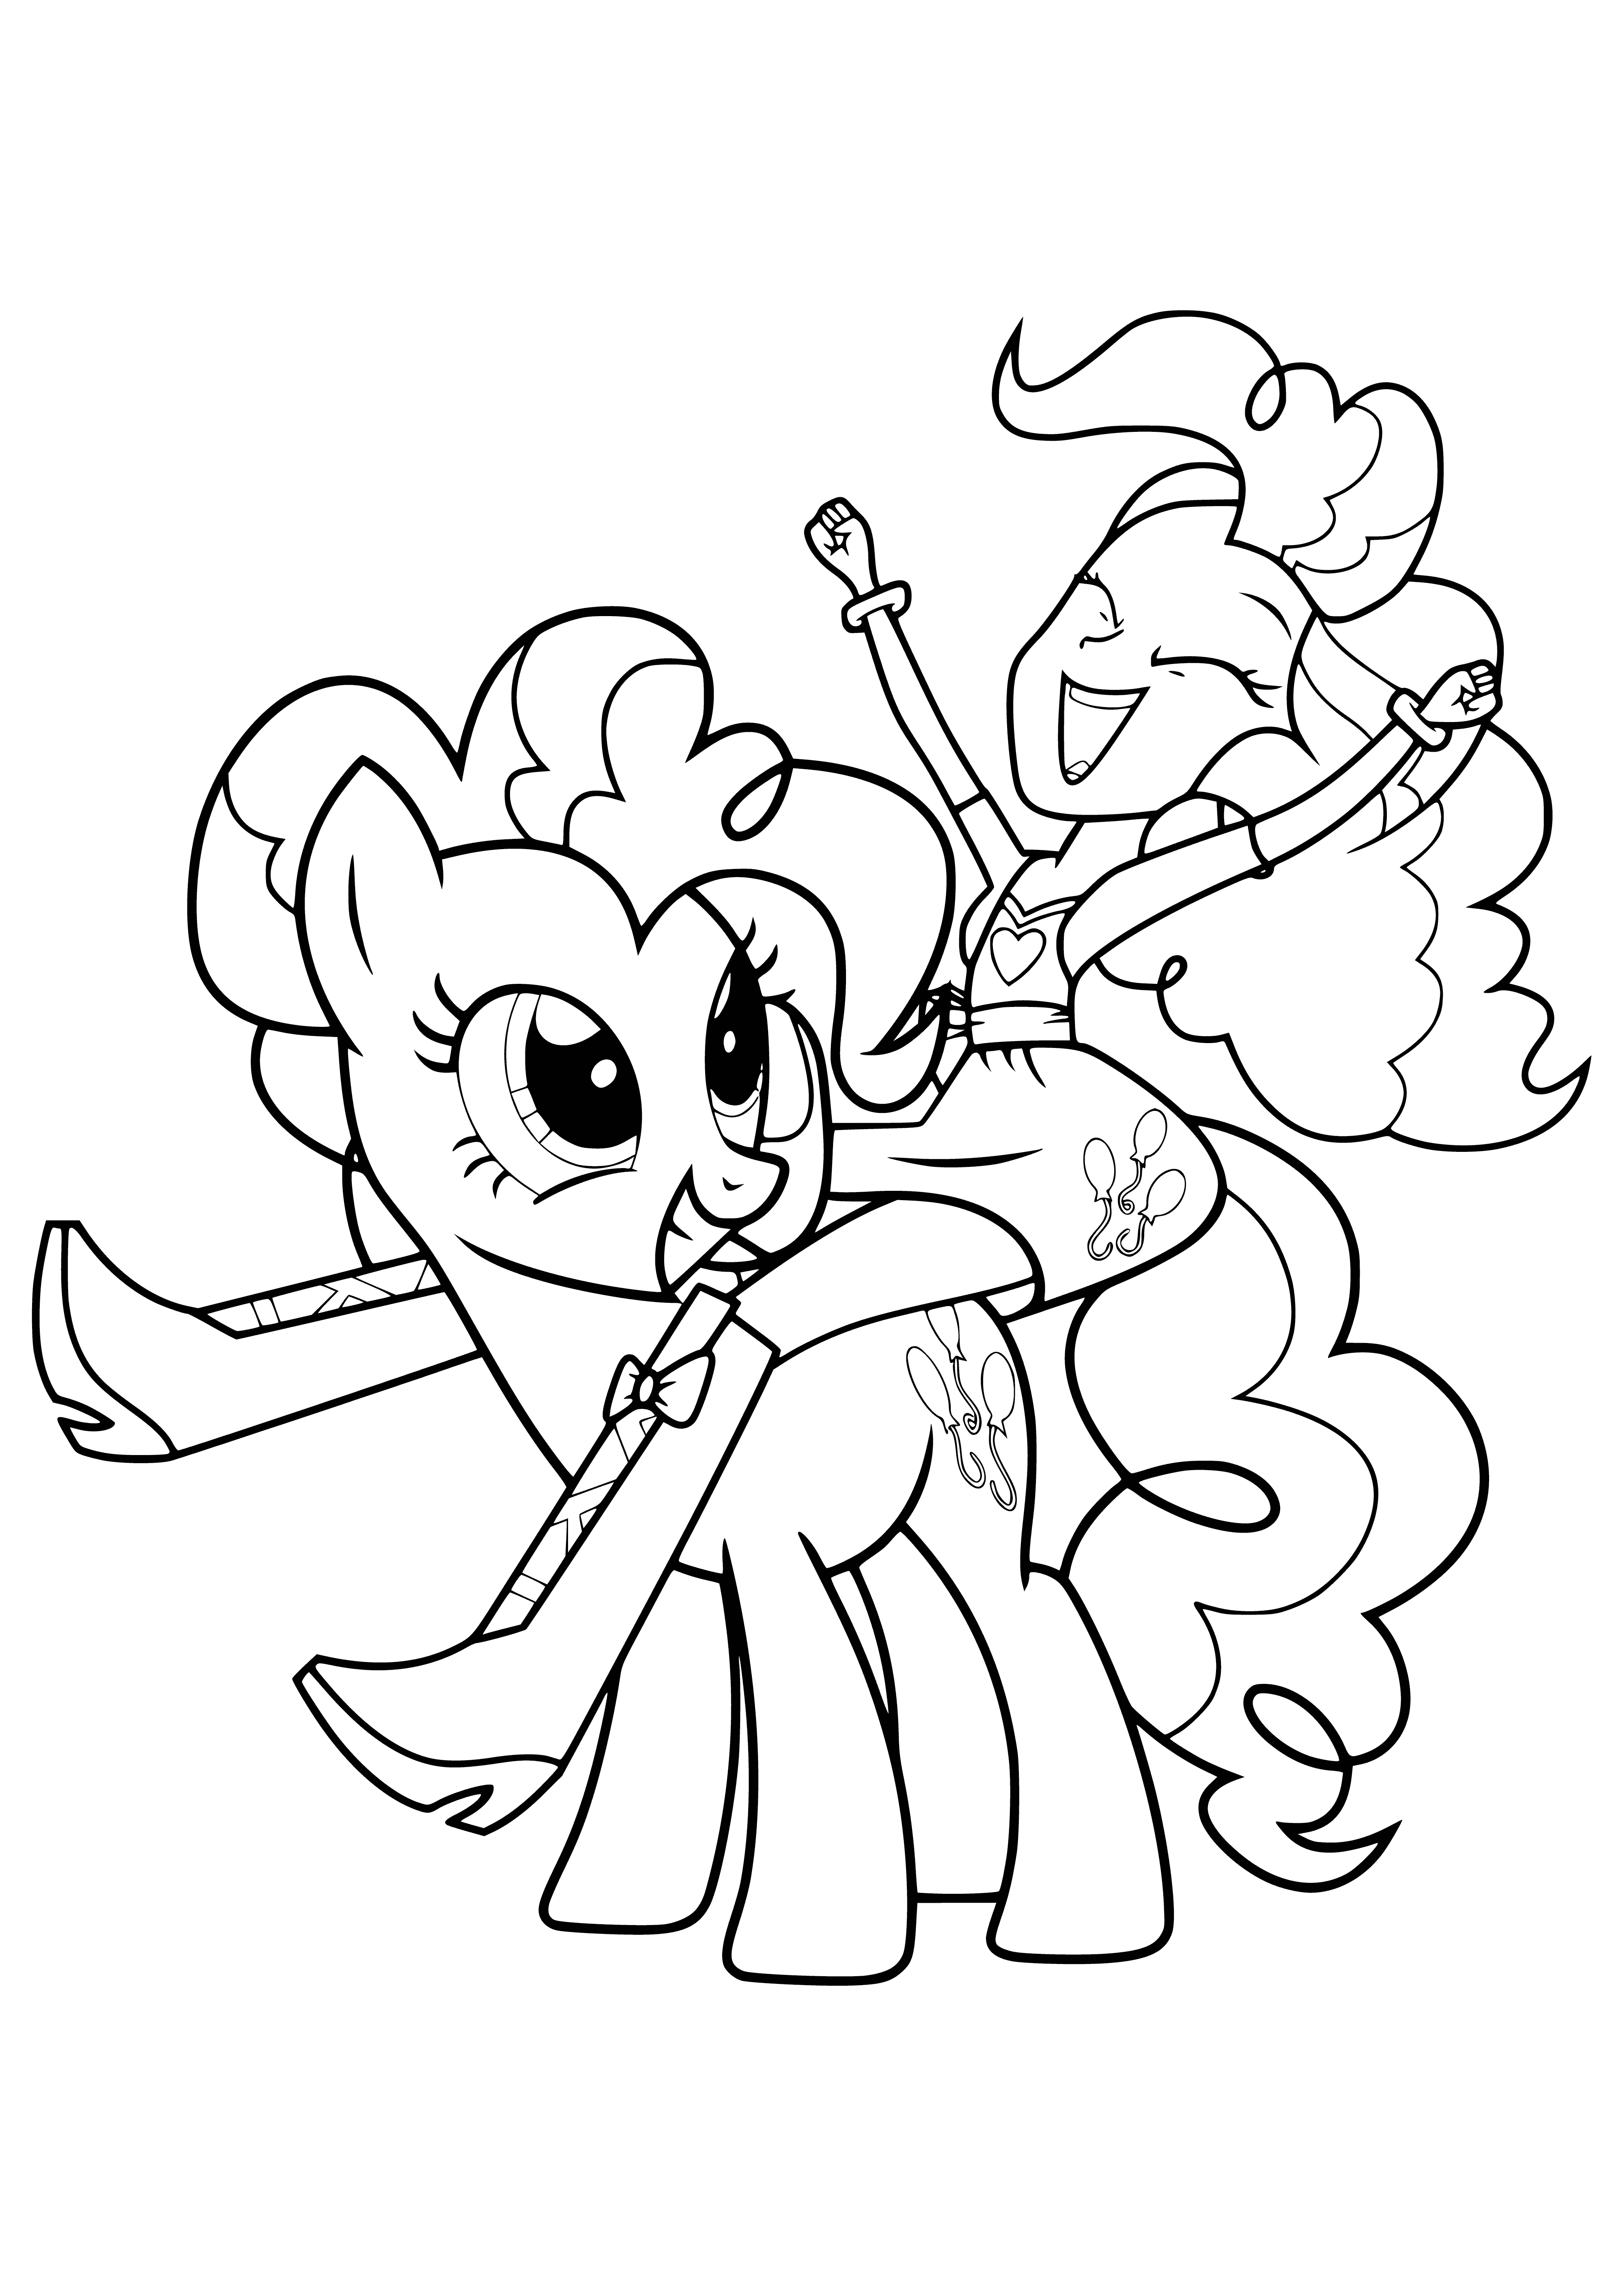 coloring page: A girl with pink hair stands next to a pink-colored pony with a curly pink mane & tail. The pony has a cutie mark of three pink balloons. The girl is all-pink too!